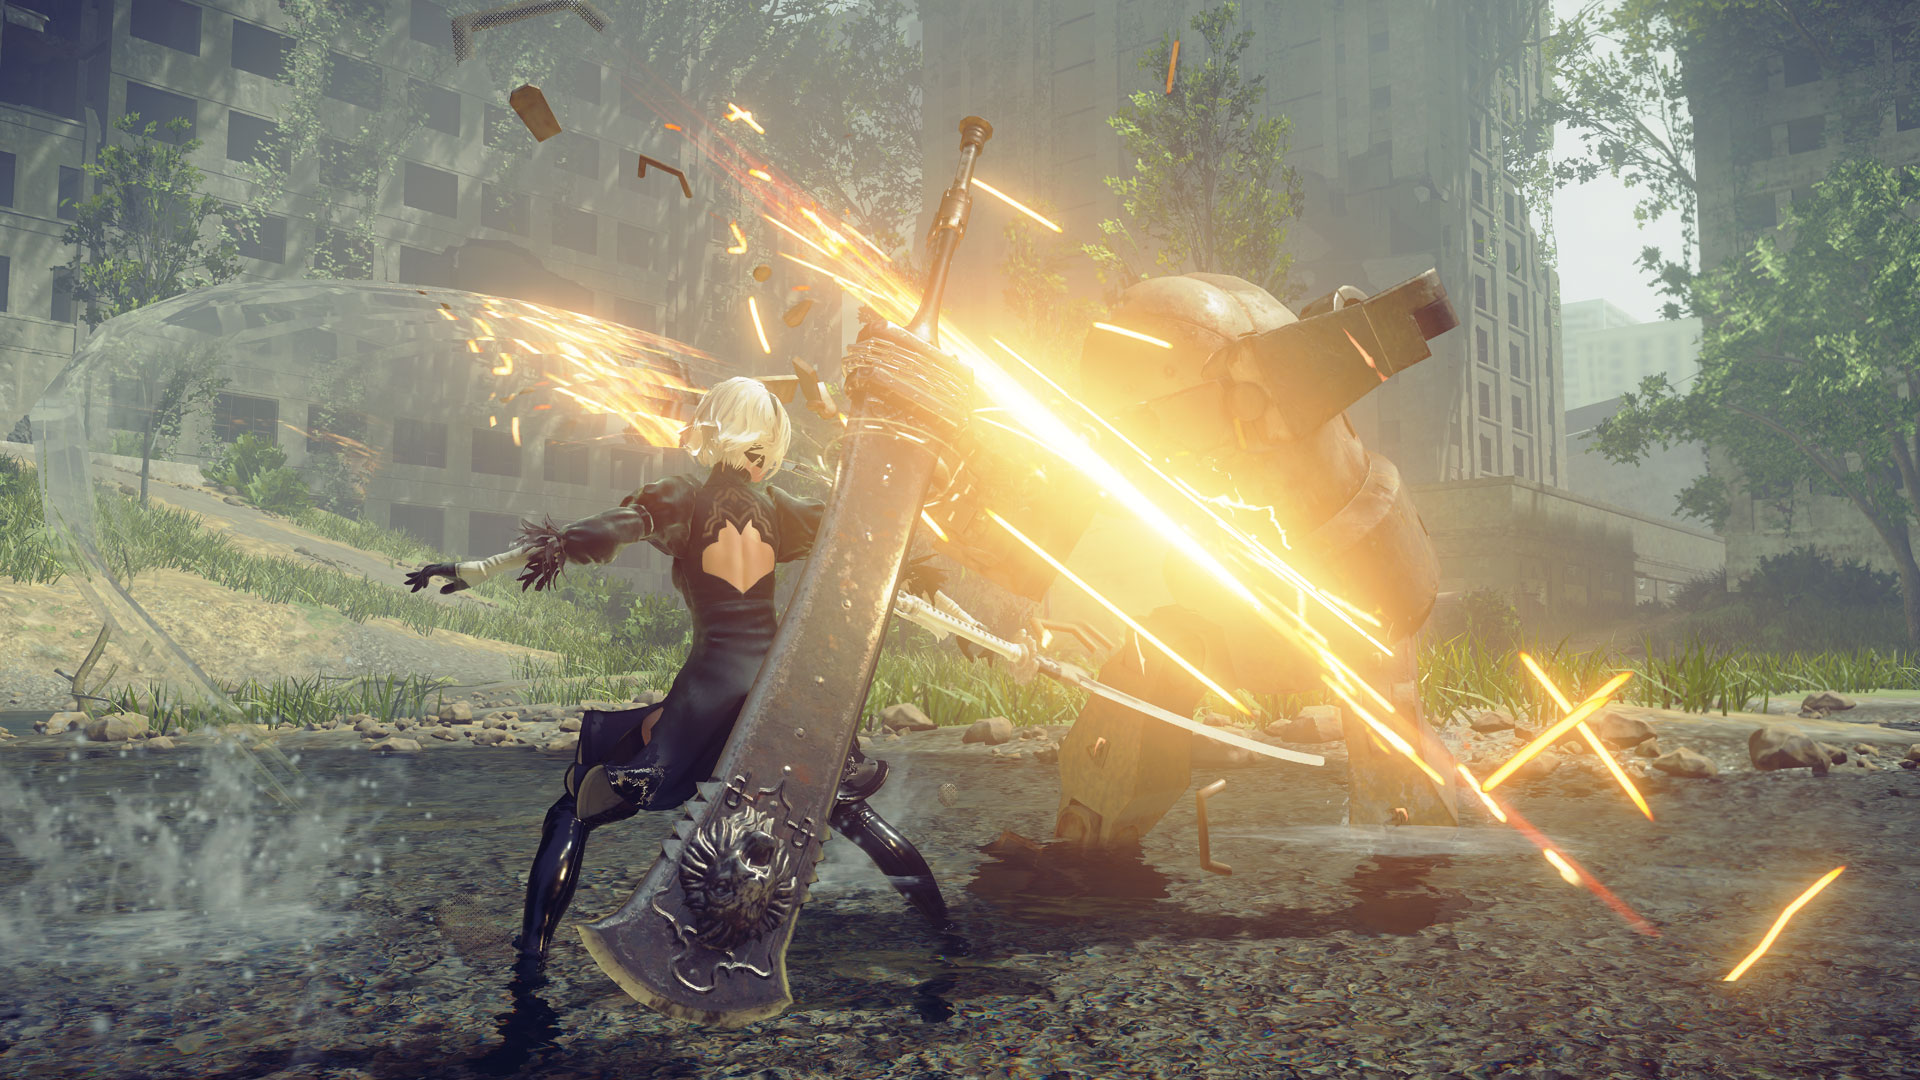 Nierautomata Radeon Graphics Cards And 4k Support